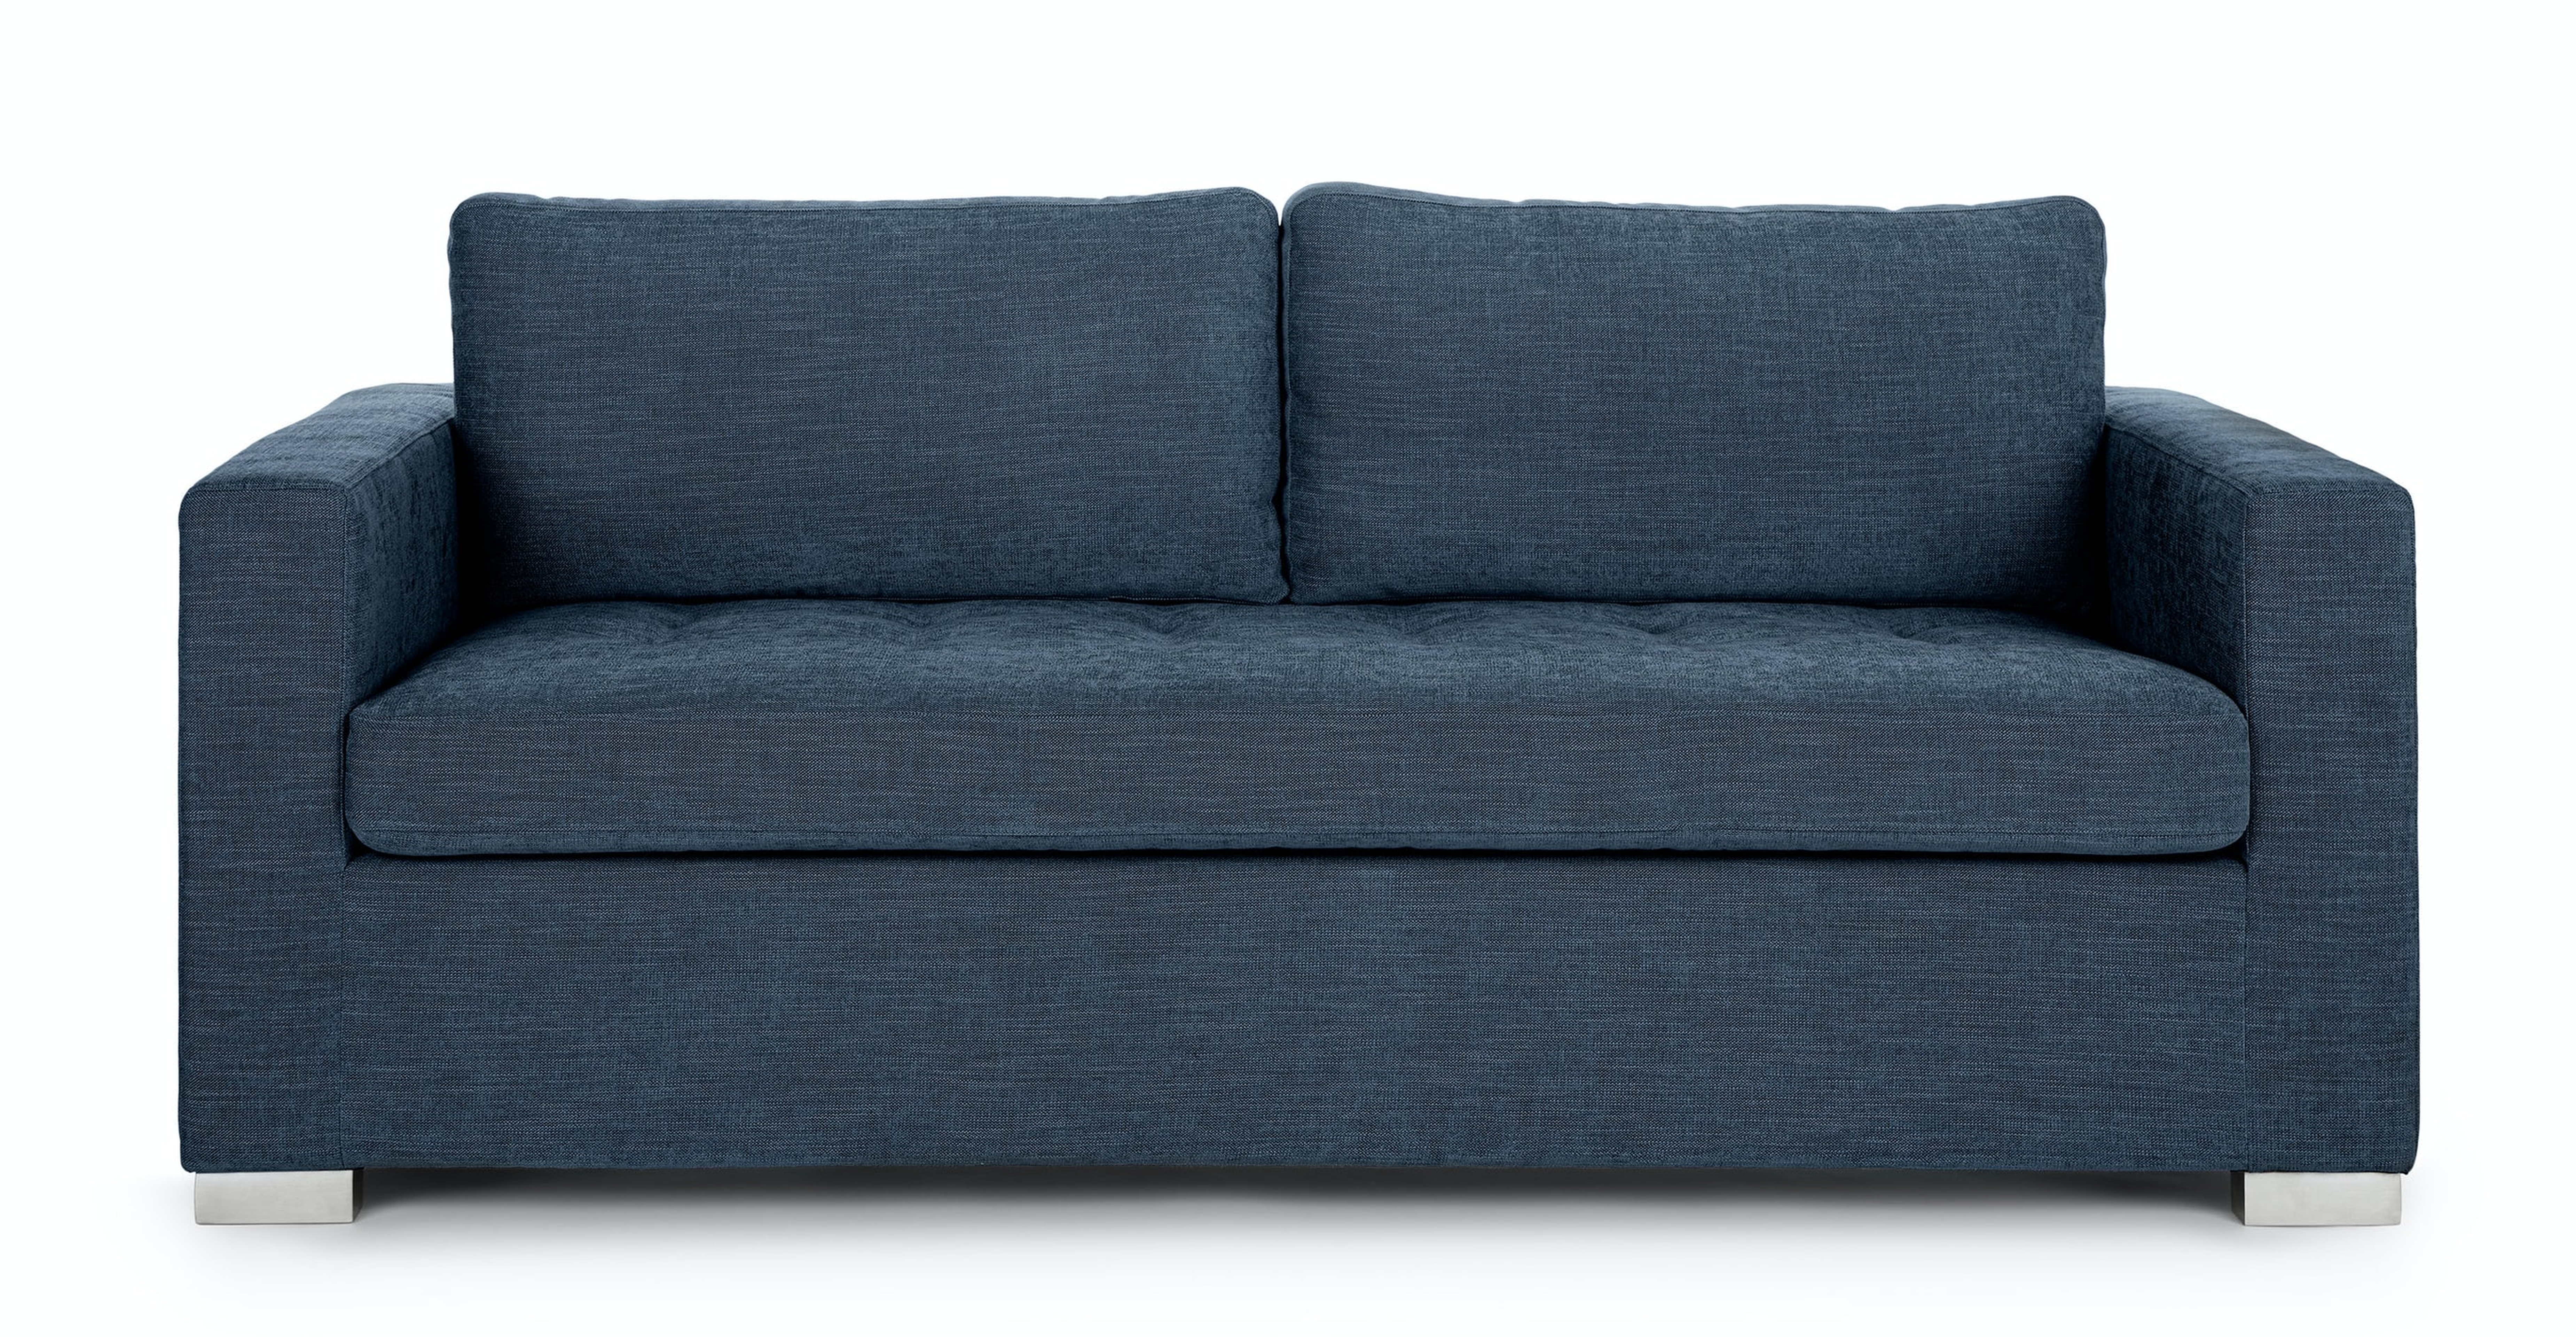 Soma Midnight Blue Sofa Bed - Article